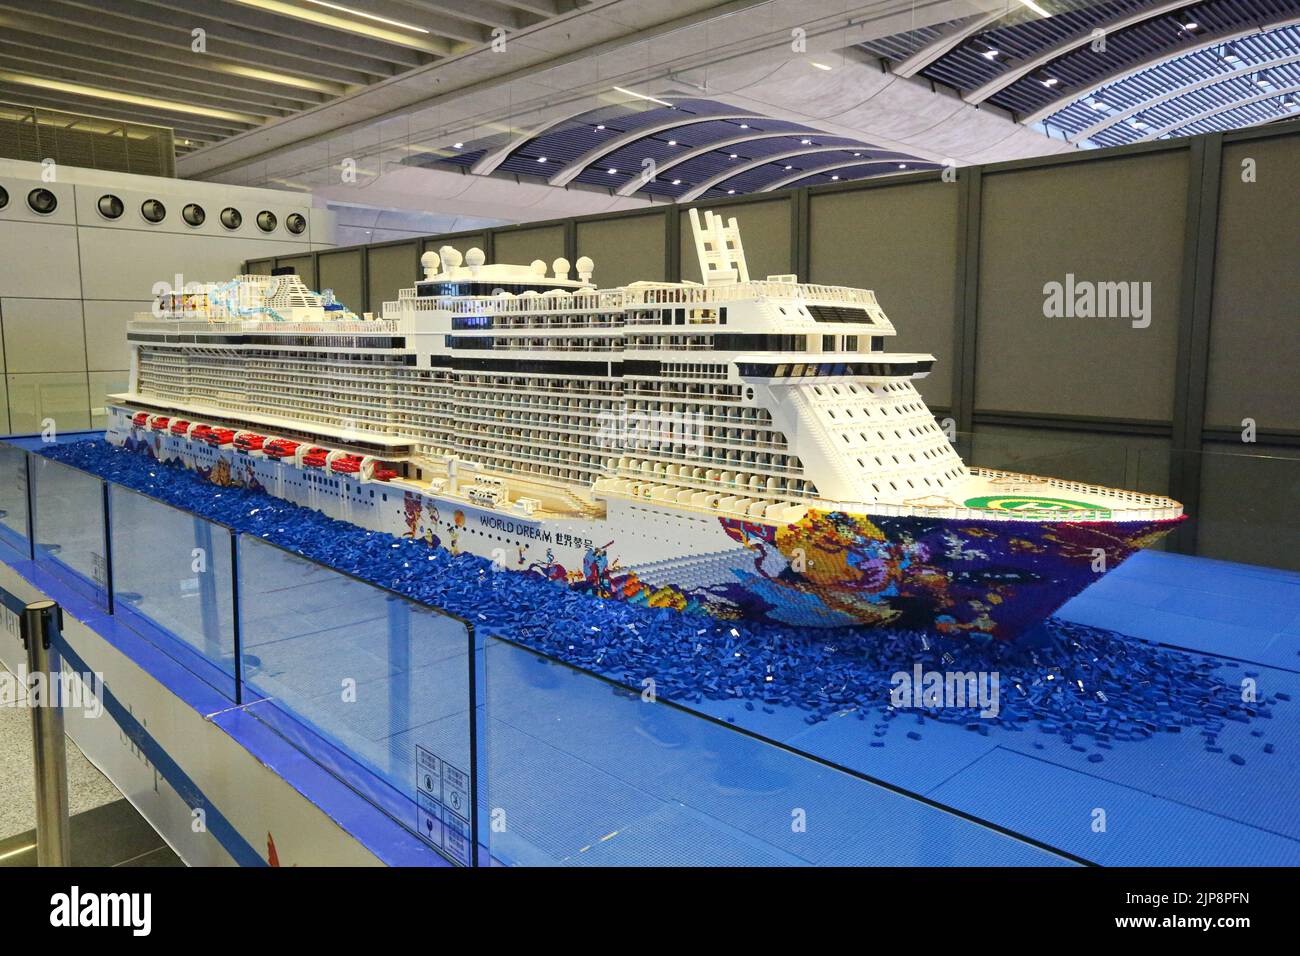 7,464 Shopping Cruise Ship Images, Stock Photos, 3D objects